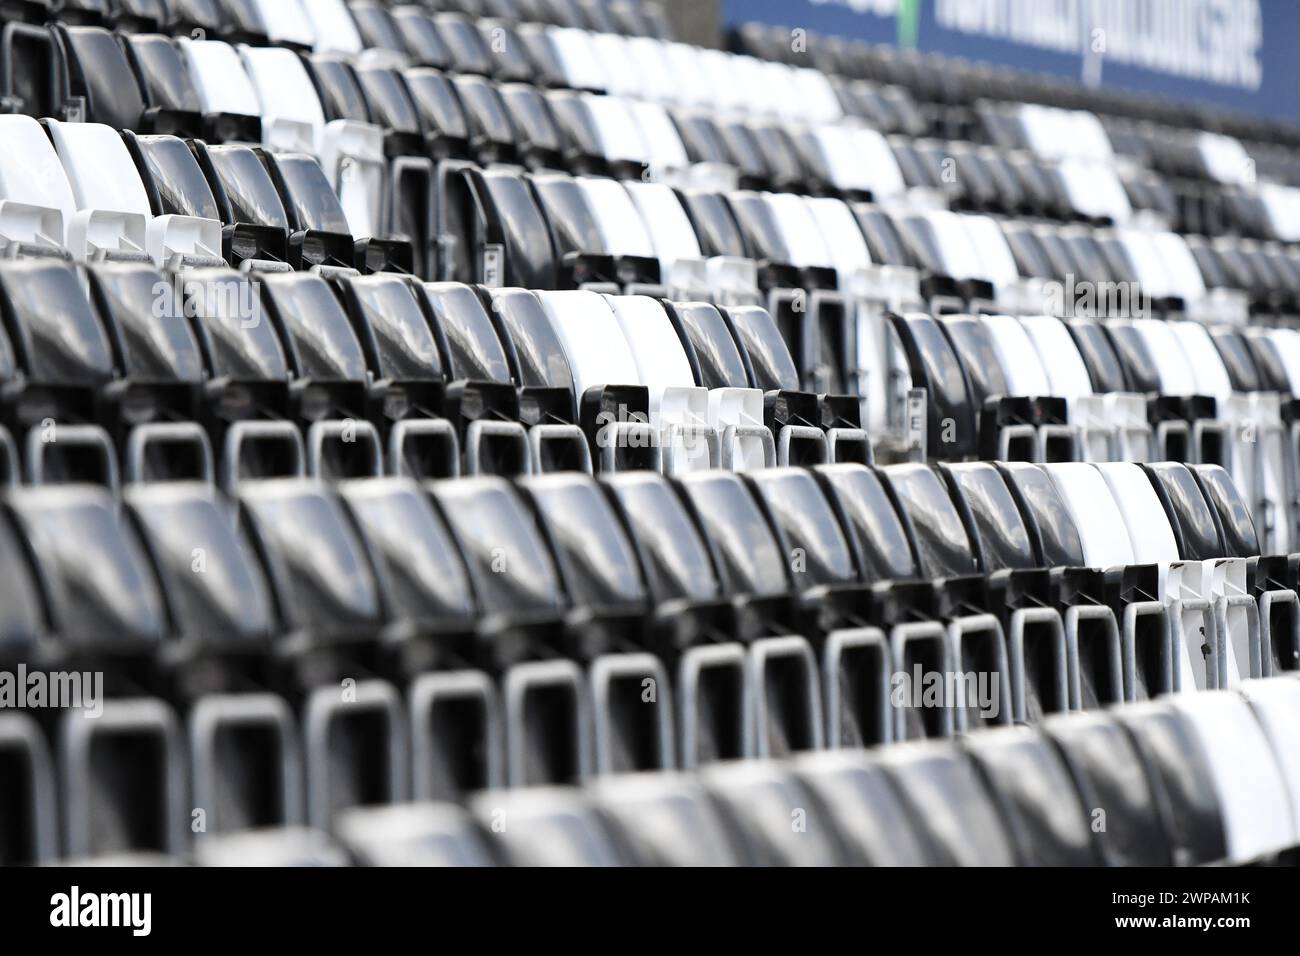 Swansea, Wales. 27 July 2019. Multiple rows of black and white plastic seats in the stadium before the pre-season friendly match between Swansea City and Atalanta BC at the Liberty Stadium in Swansea, Wales, UK on 27 July 2019. Credit: Duncan Thomas/Majestic Media. Stock Photo